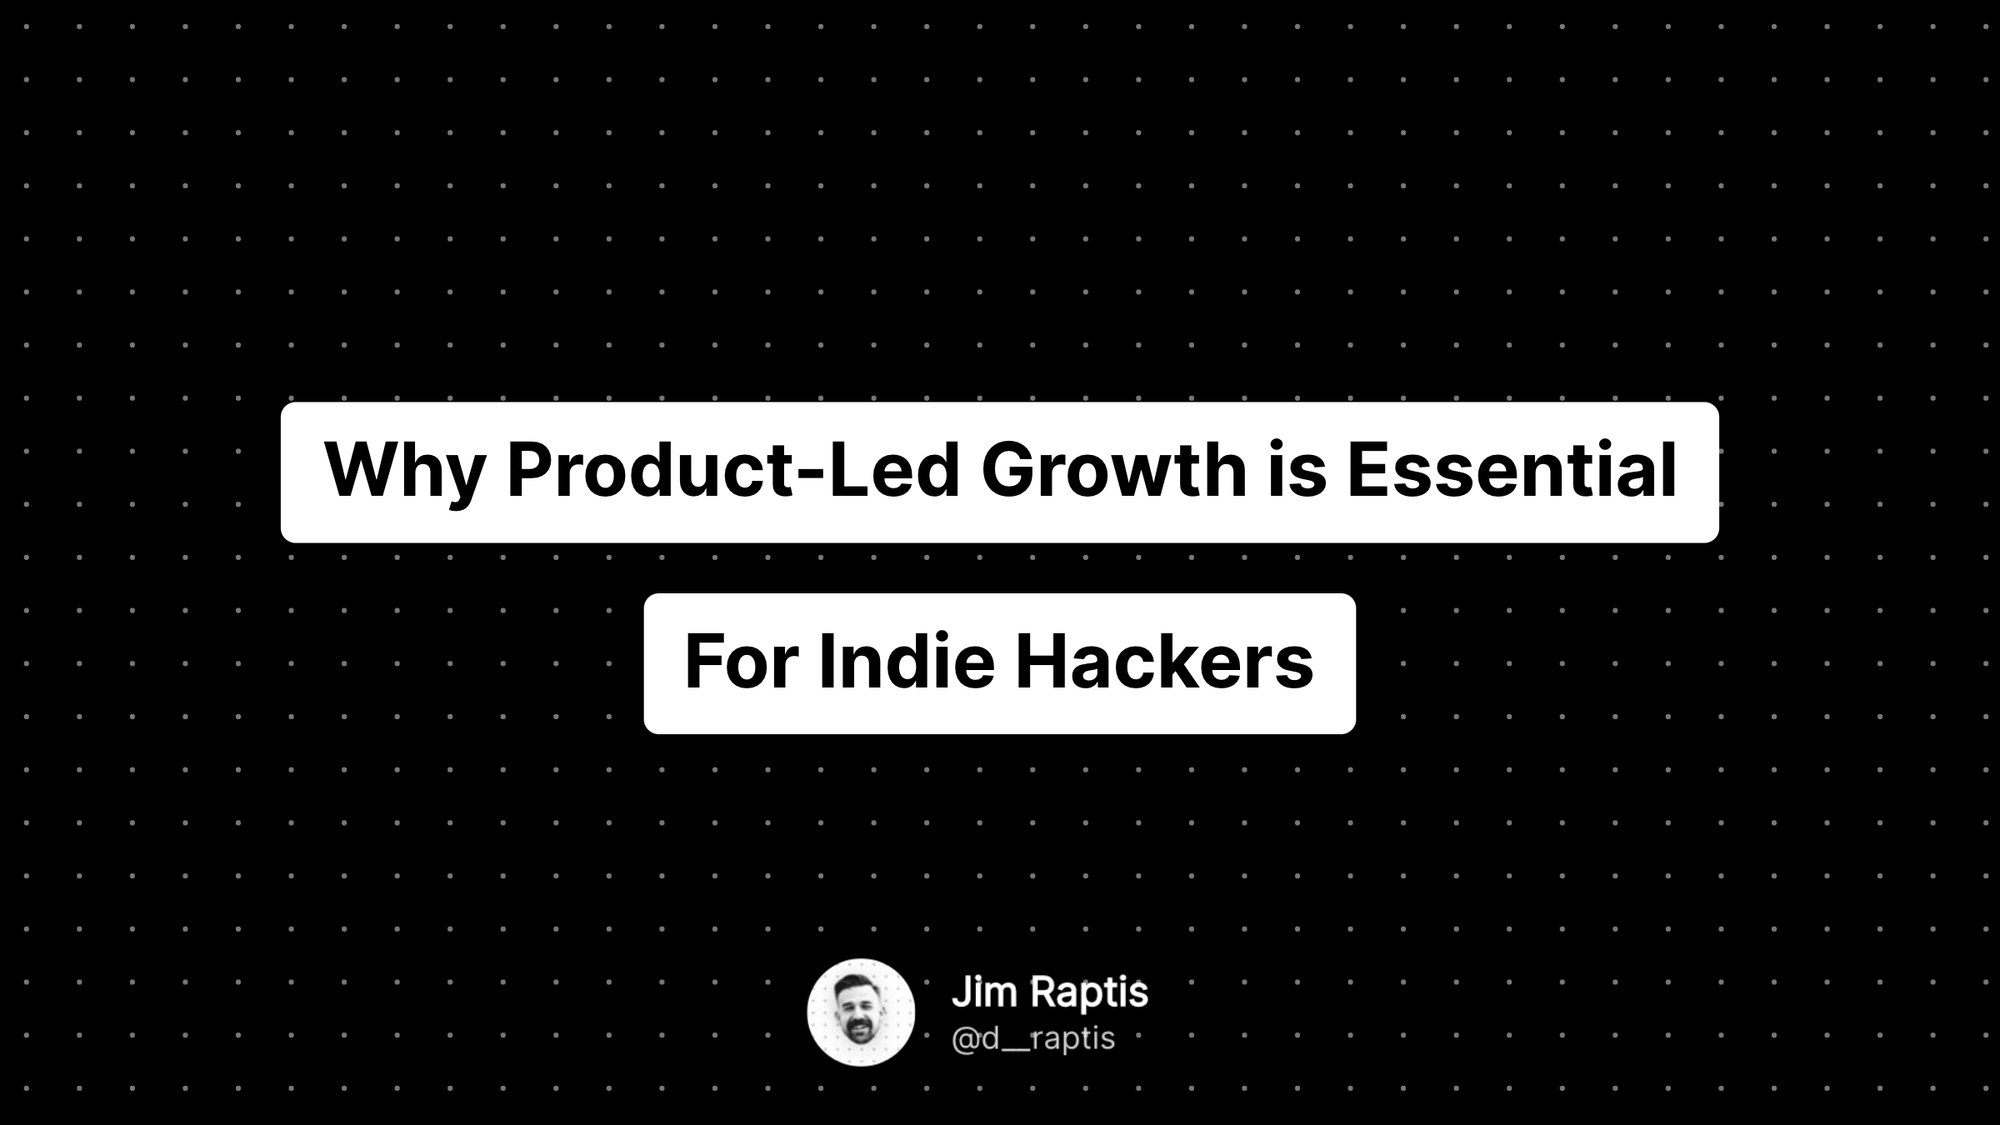 Why Product-Led Growth is Essential for Indie Hackers